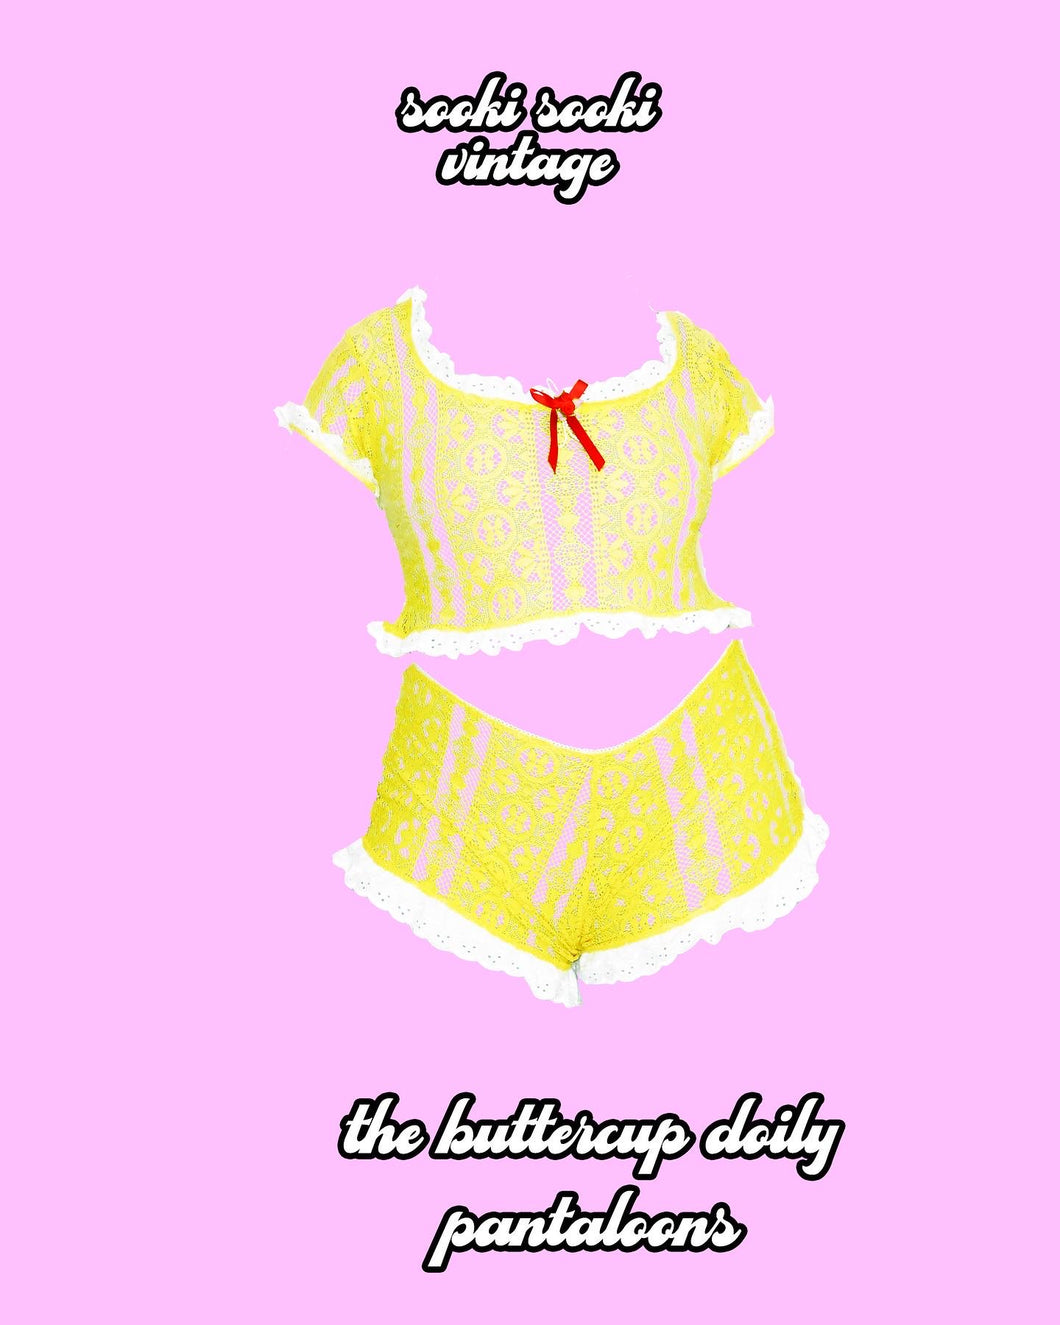 The Buttercup Doily Pantaloons